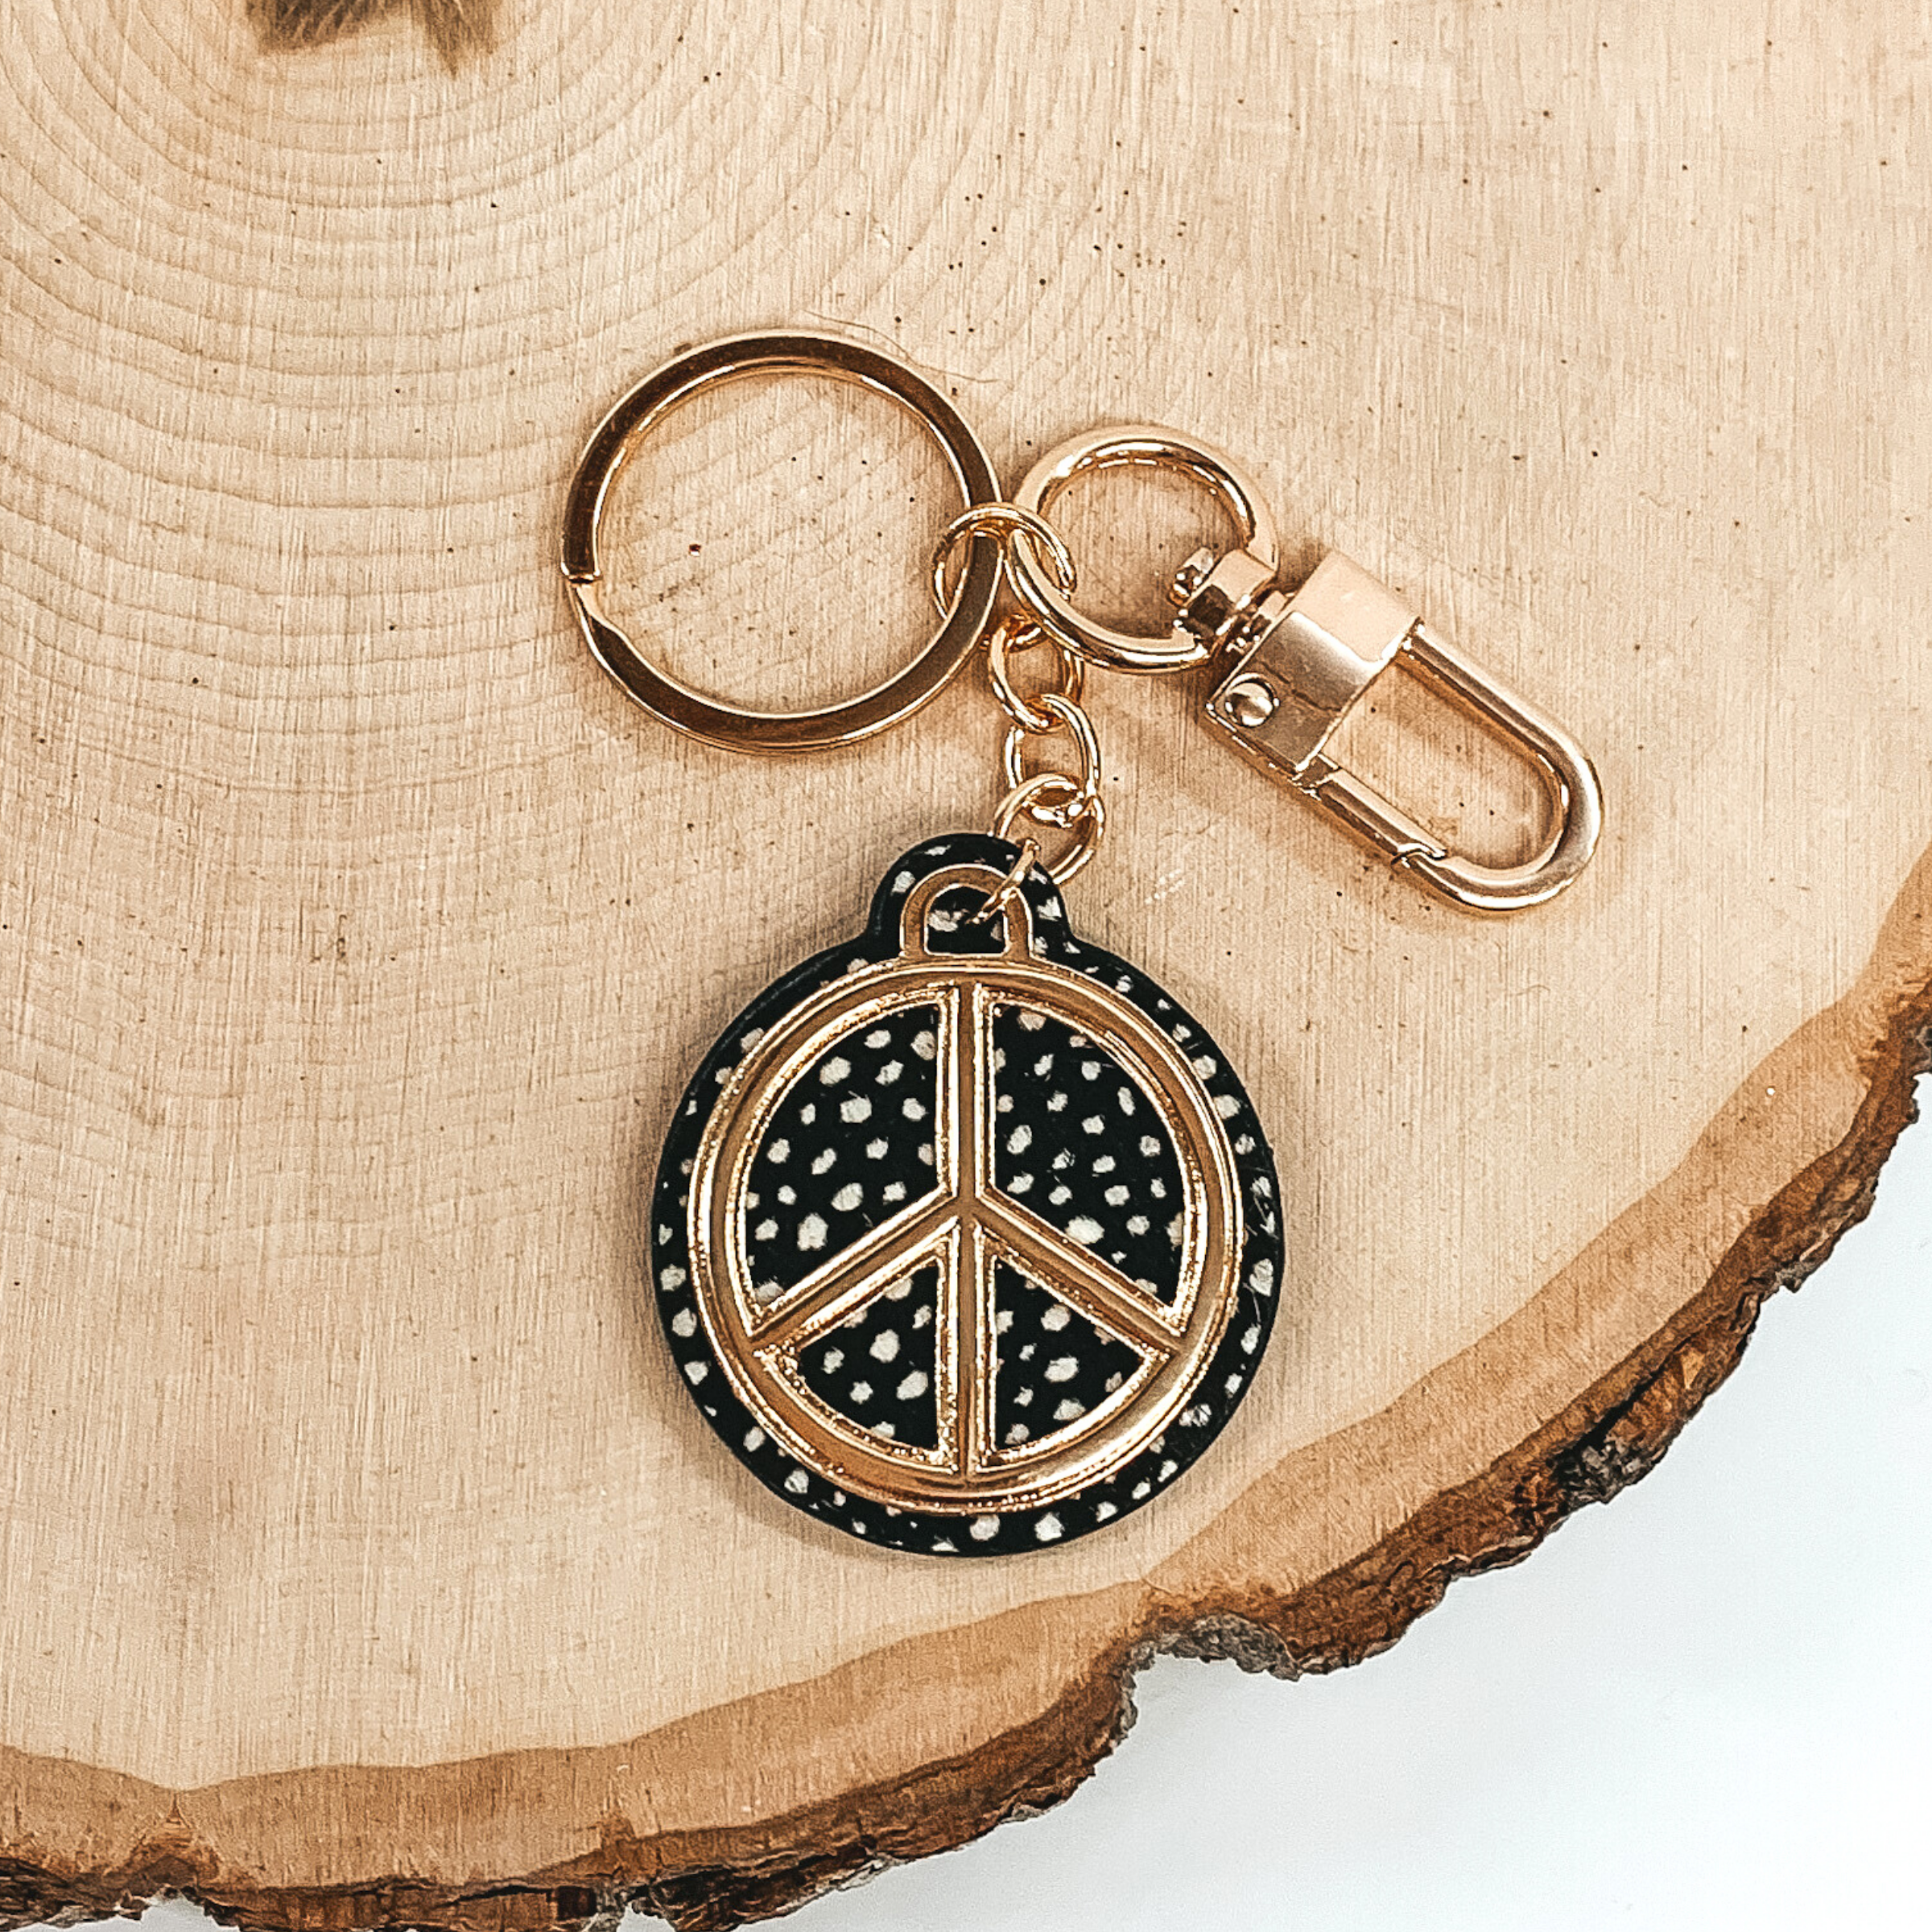 Gold key chain with a black and white dotted print circle pendant that includes a gold peace sign outline. This key chain is pictured on a piece of wood on a white background.